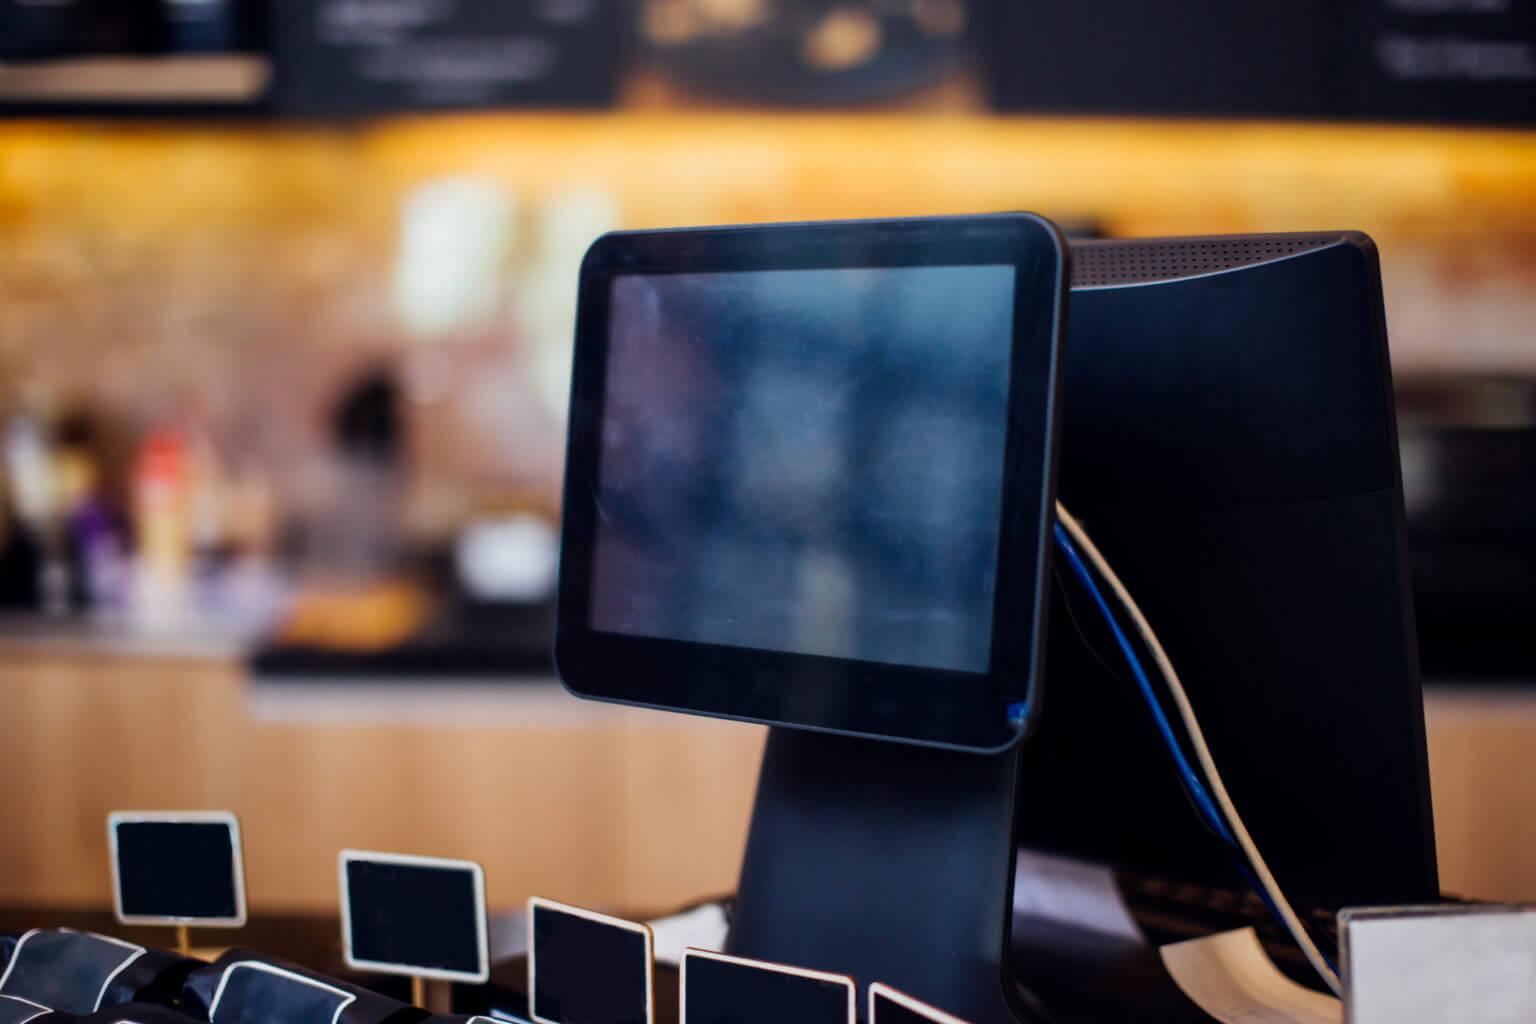 Basic POS knowledge: Compare POS system and cash register